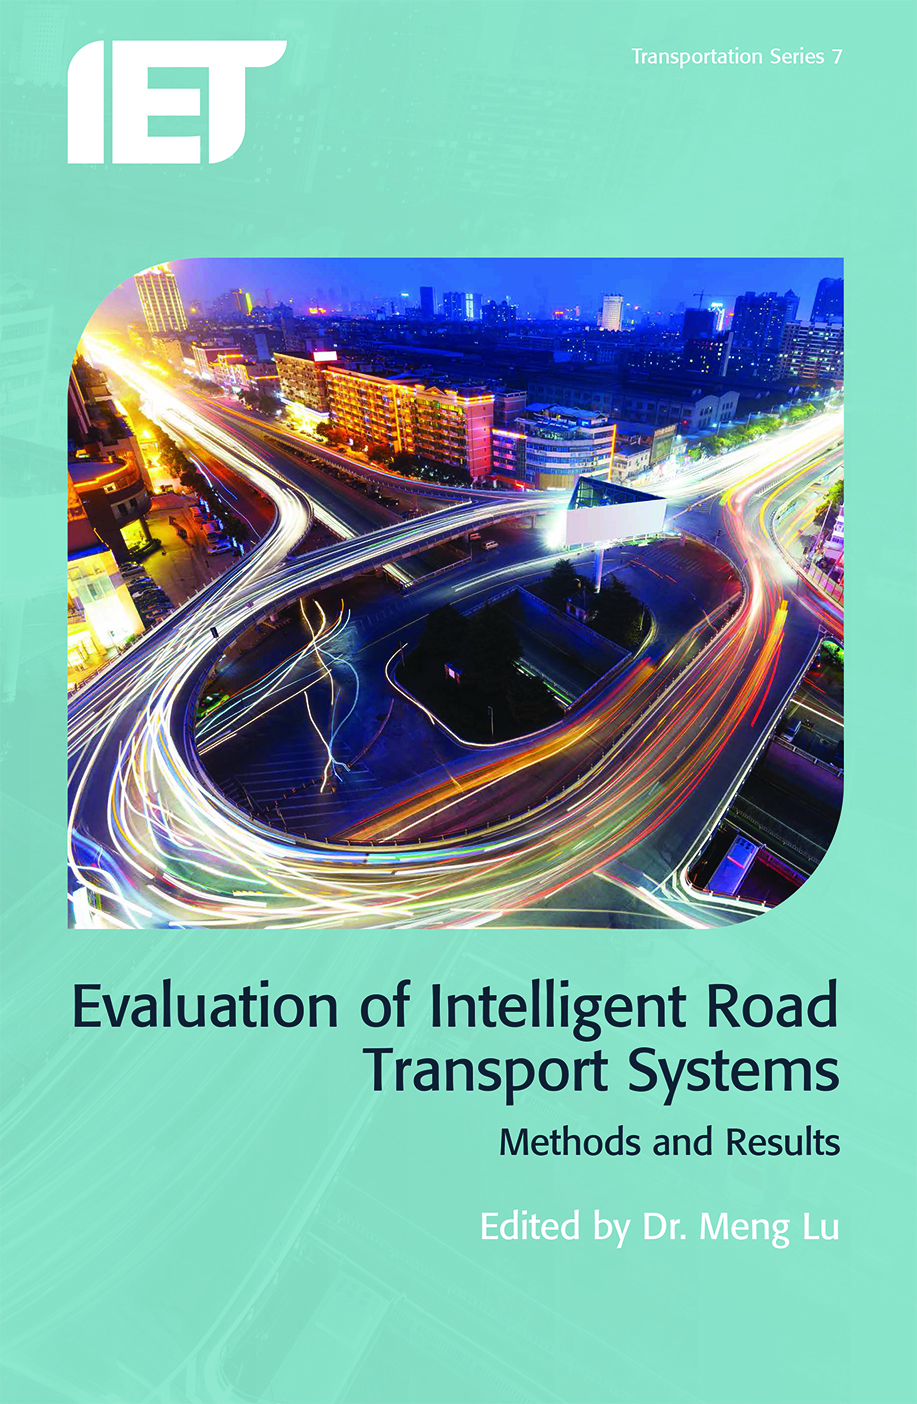 Evaluation of Intelligent Road Transport Systems, Methods and results